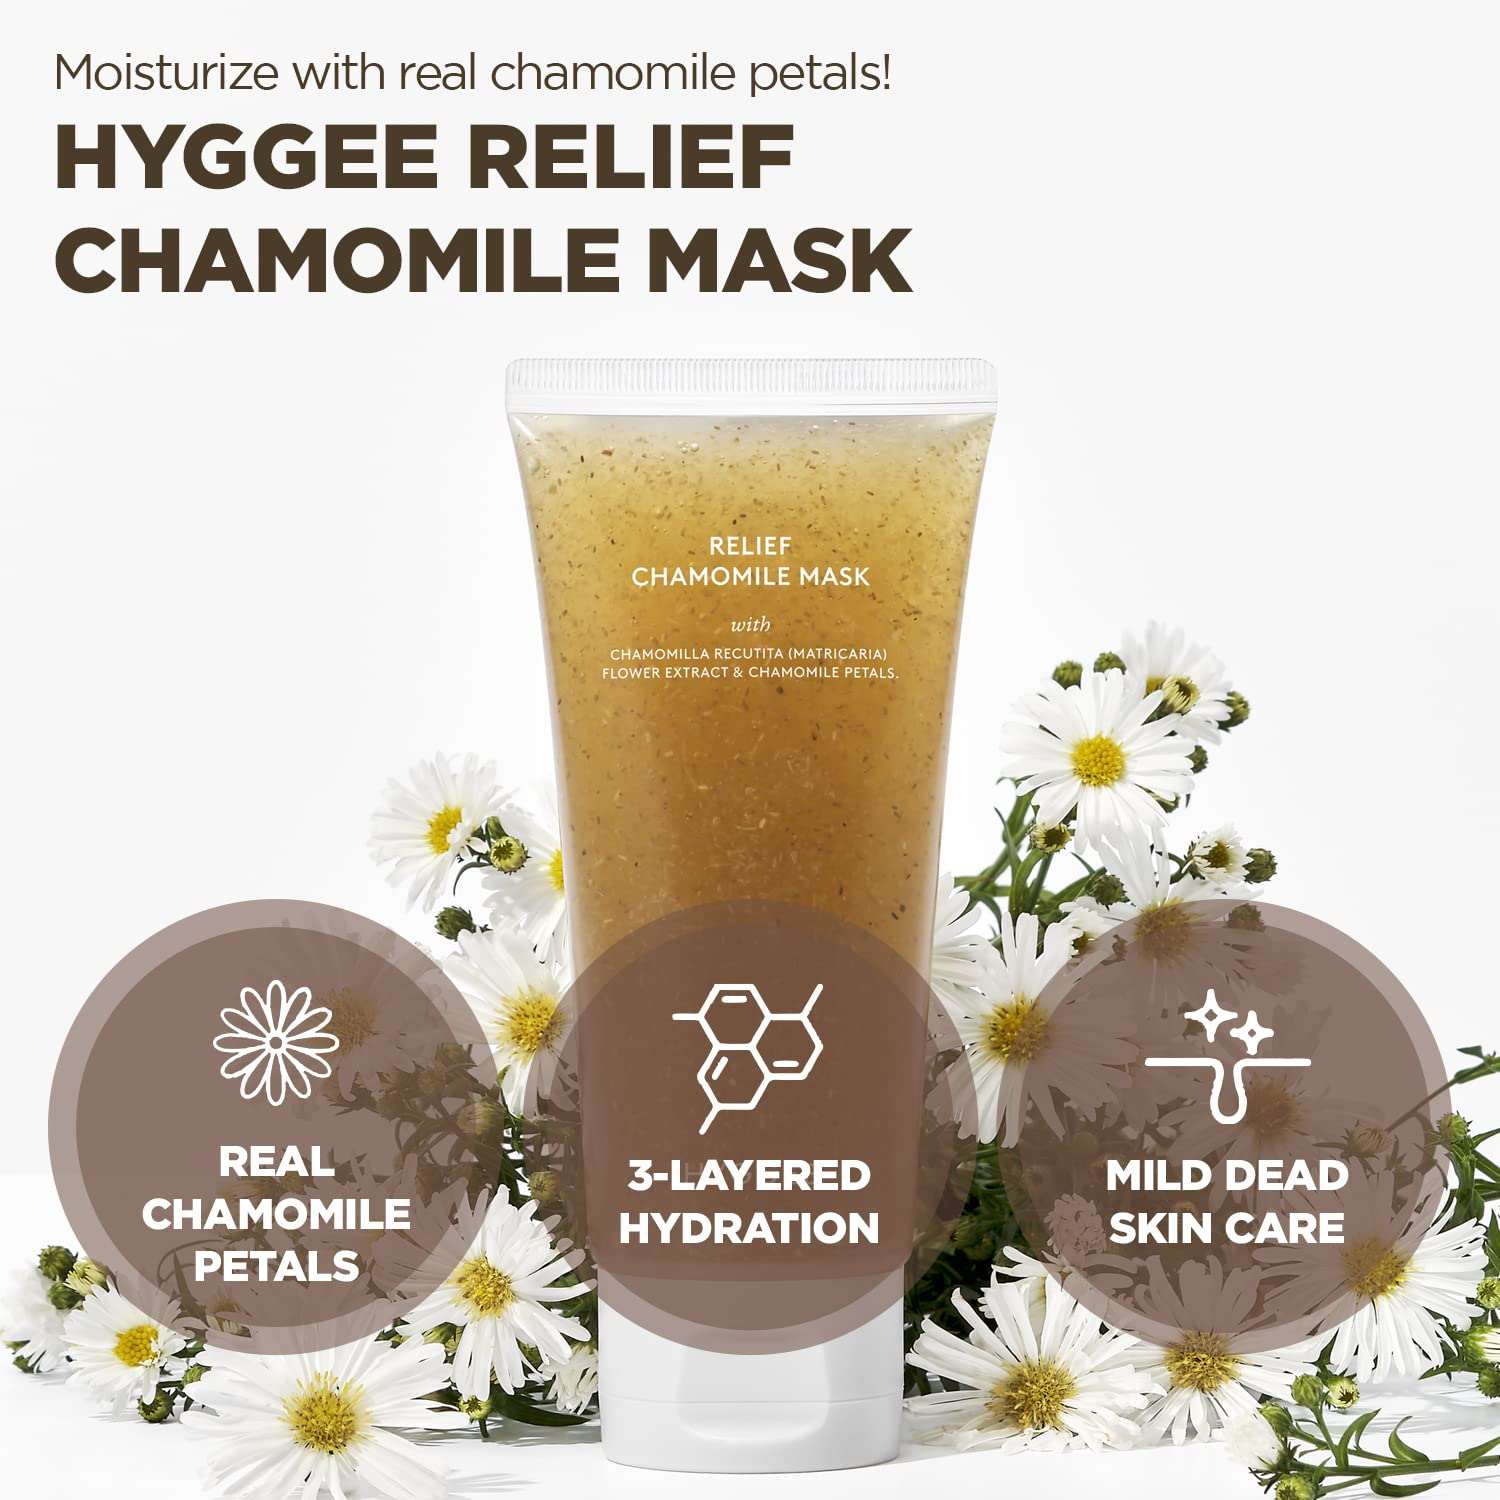 HYGGEE Relief Chamomile Mask from HYGGEE